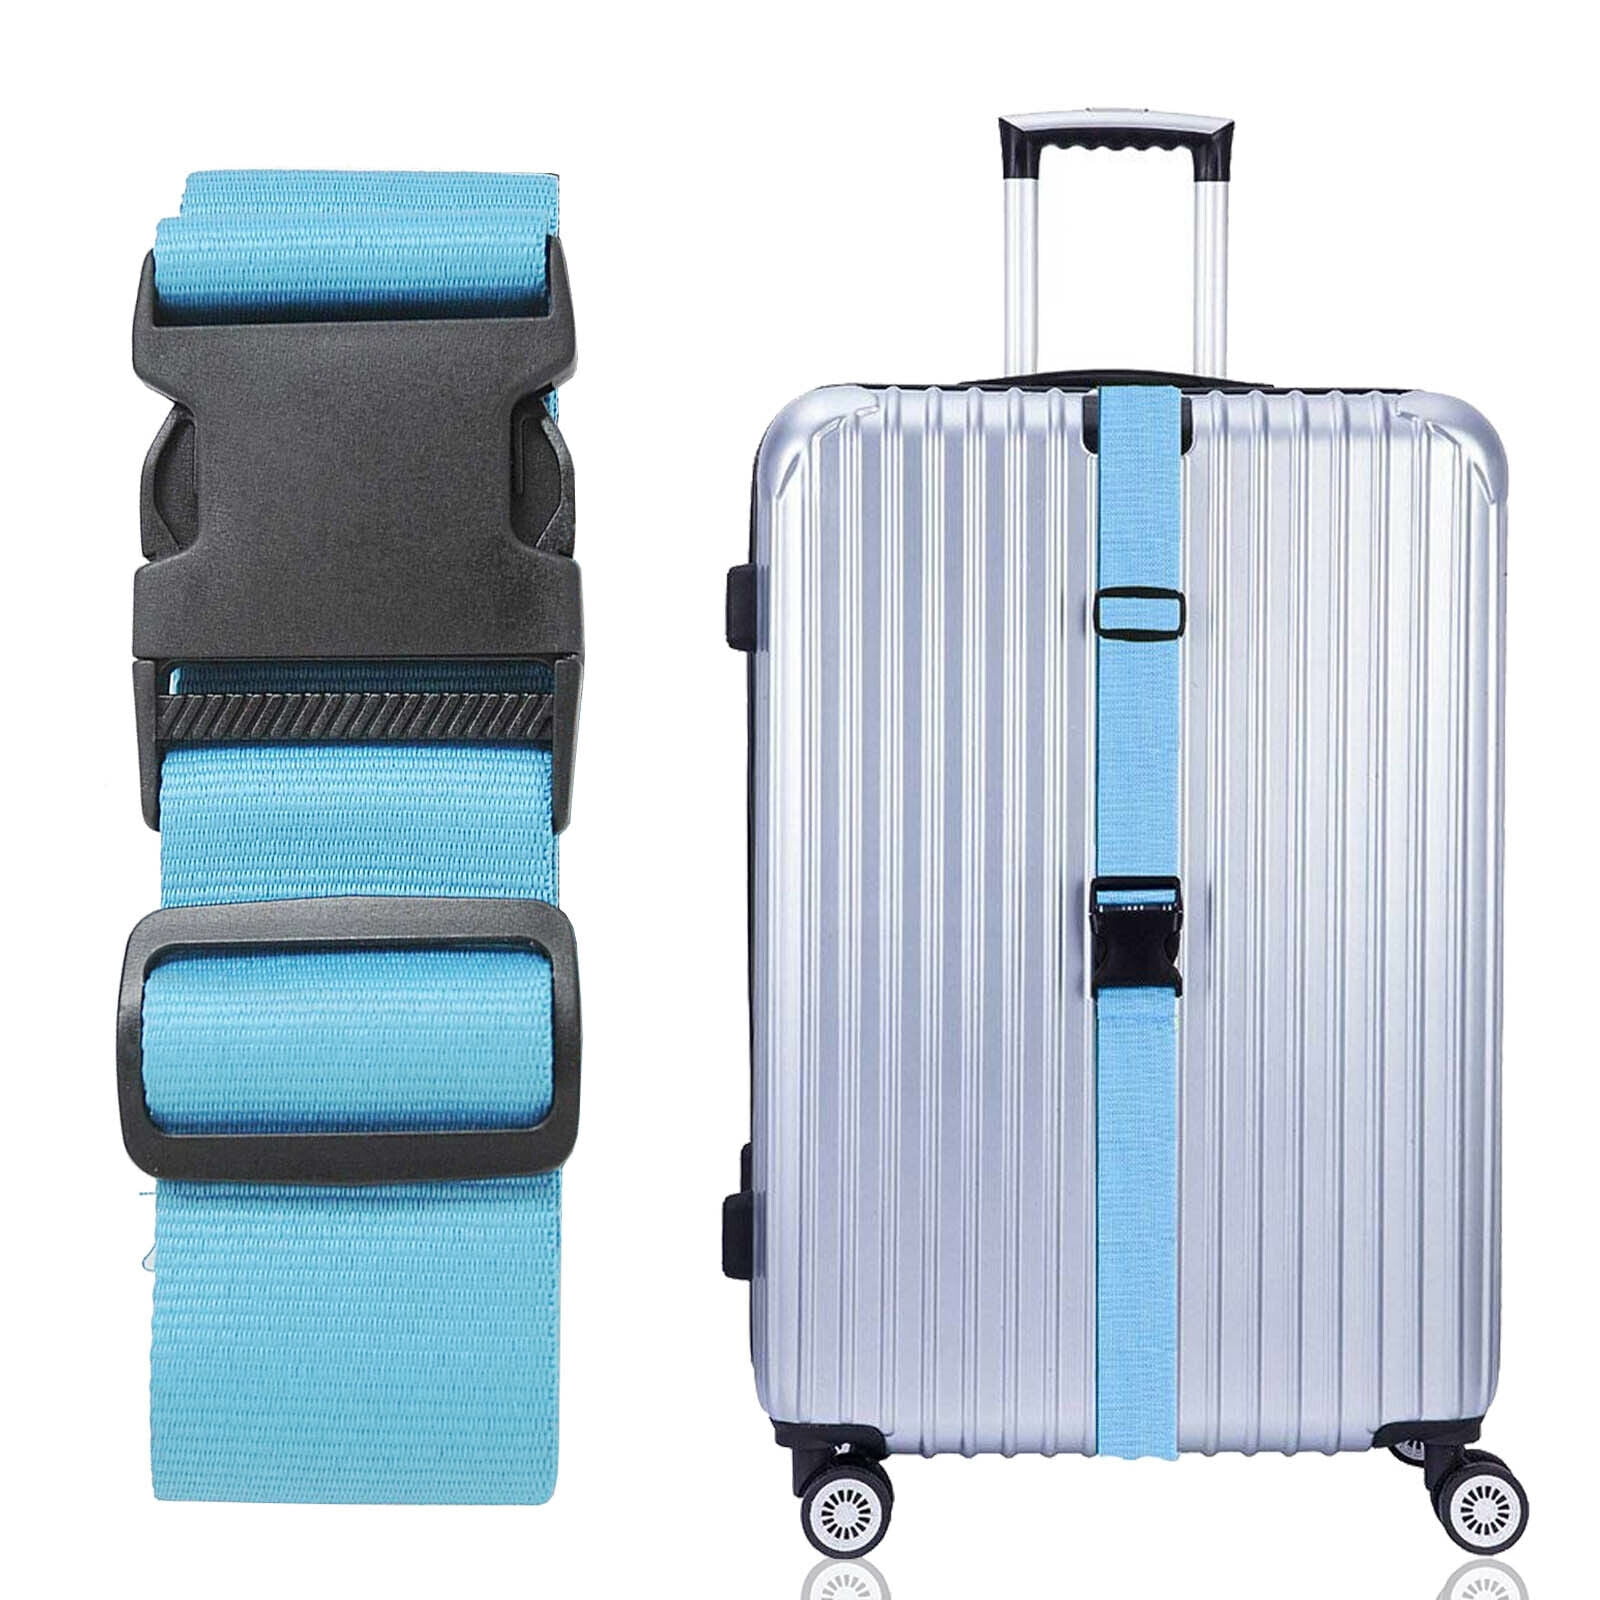 Adjustable Heavy Duty 2M Long Luggage Straps Suitcase Belt Travel  Accessories